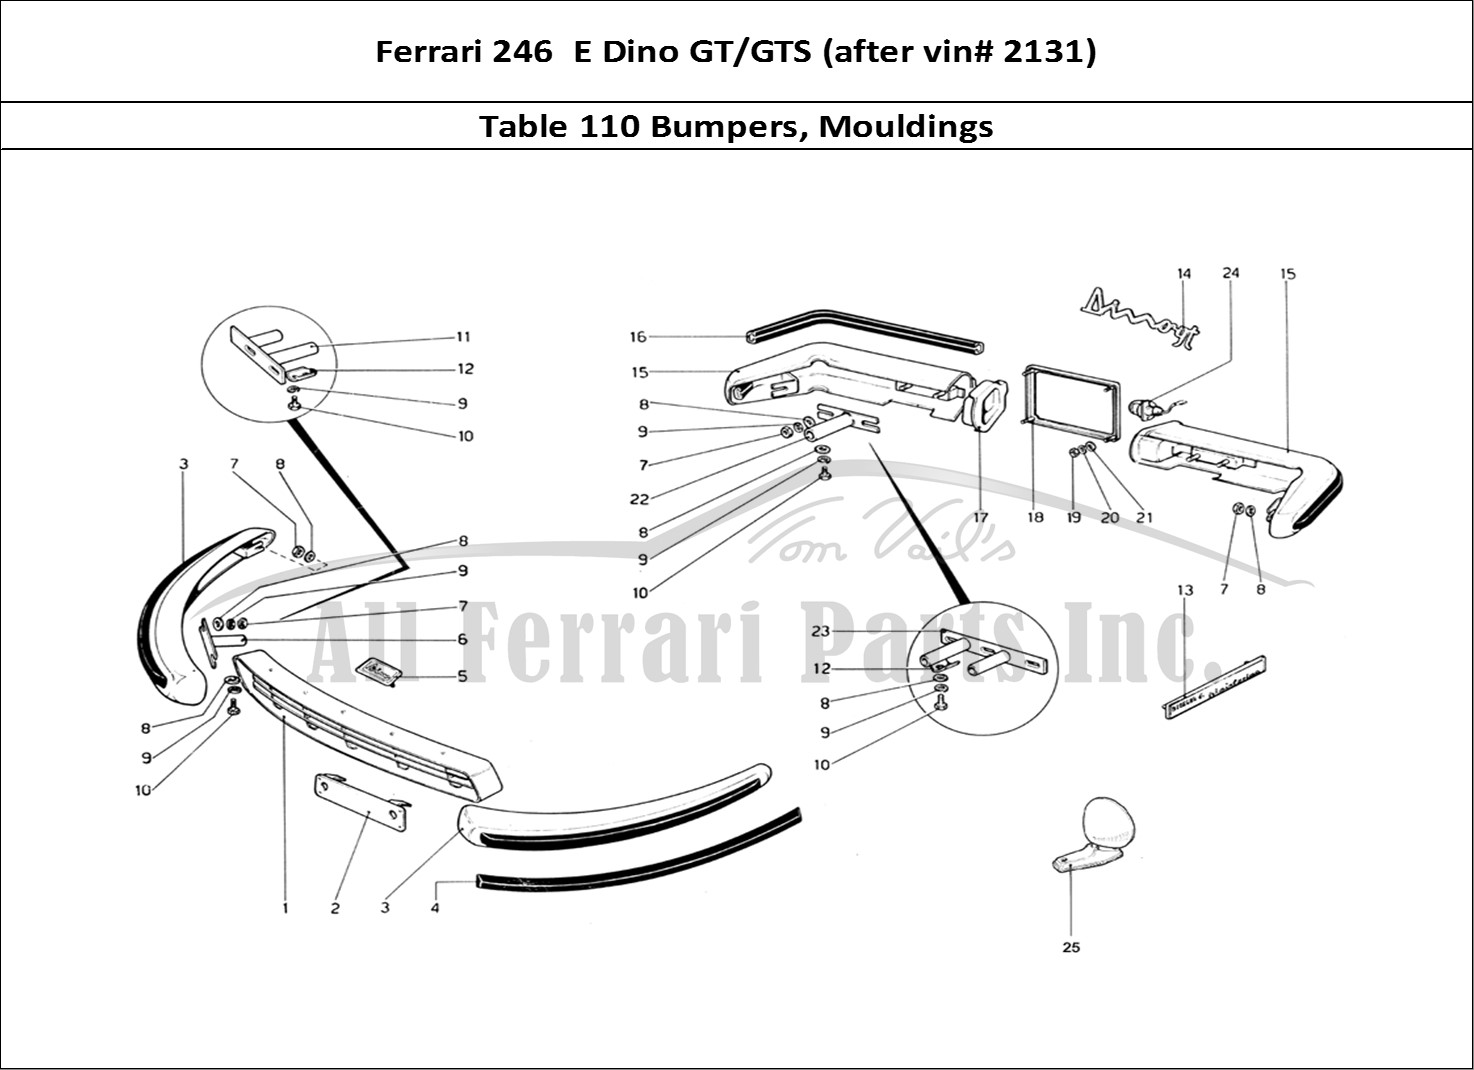 Ferrari Parts Ferrari 246 Dino (1975) Page 110 Bumpers and Mouldings